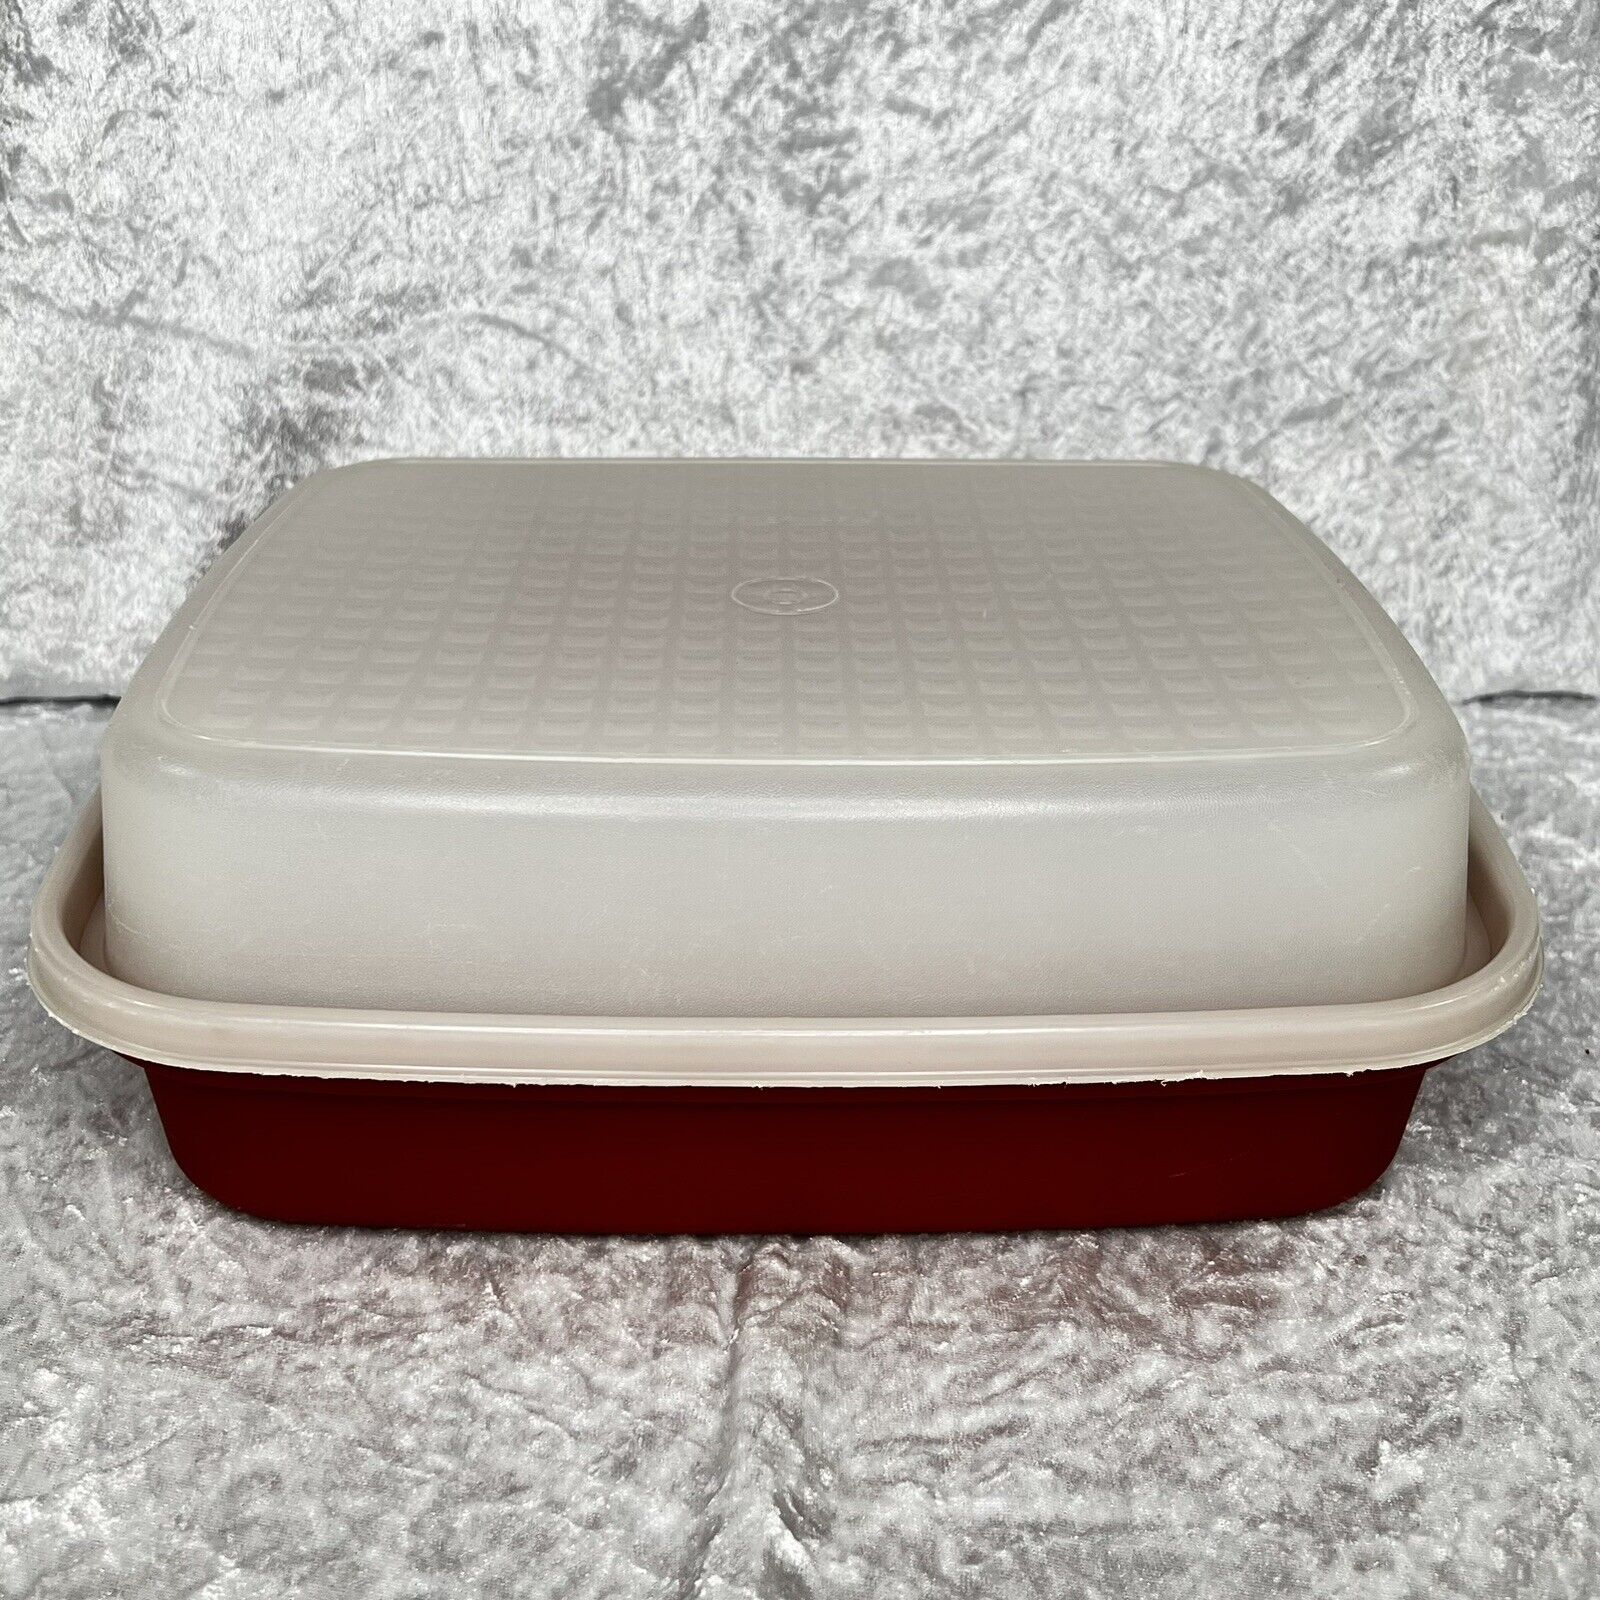 Vintage Tupperware Large Meat Marinade Container 2 Piece Paprika #1294-2 w/Lid